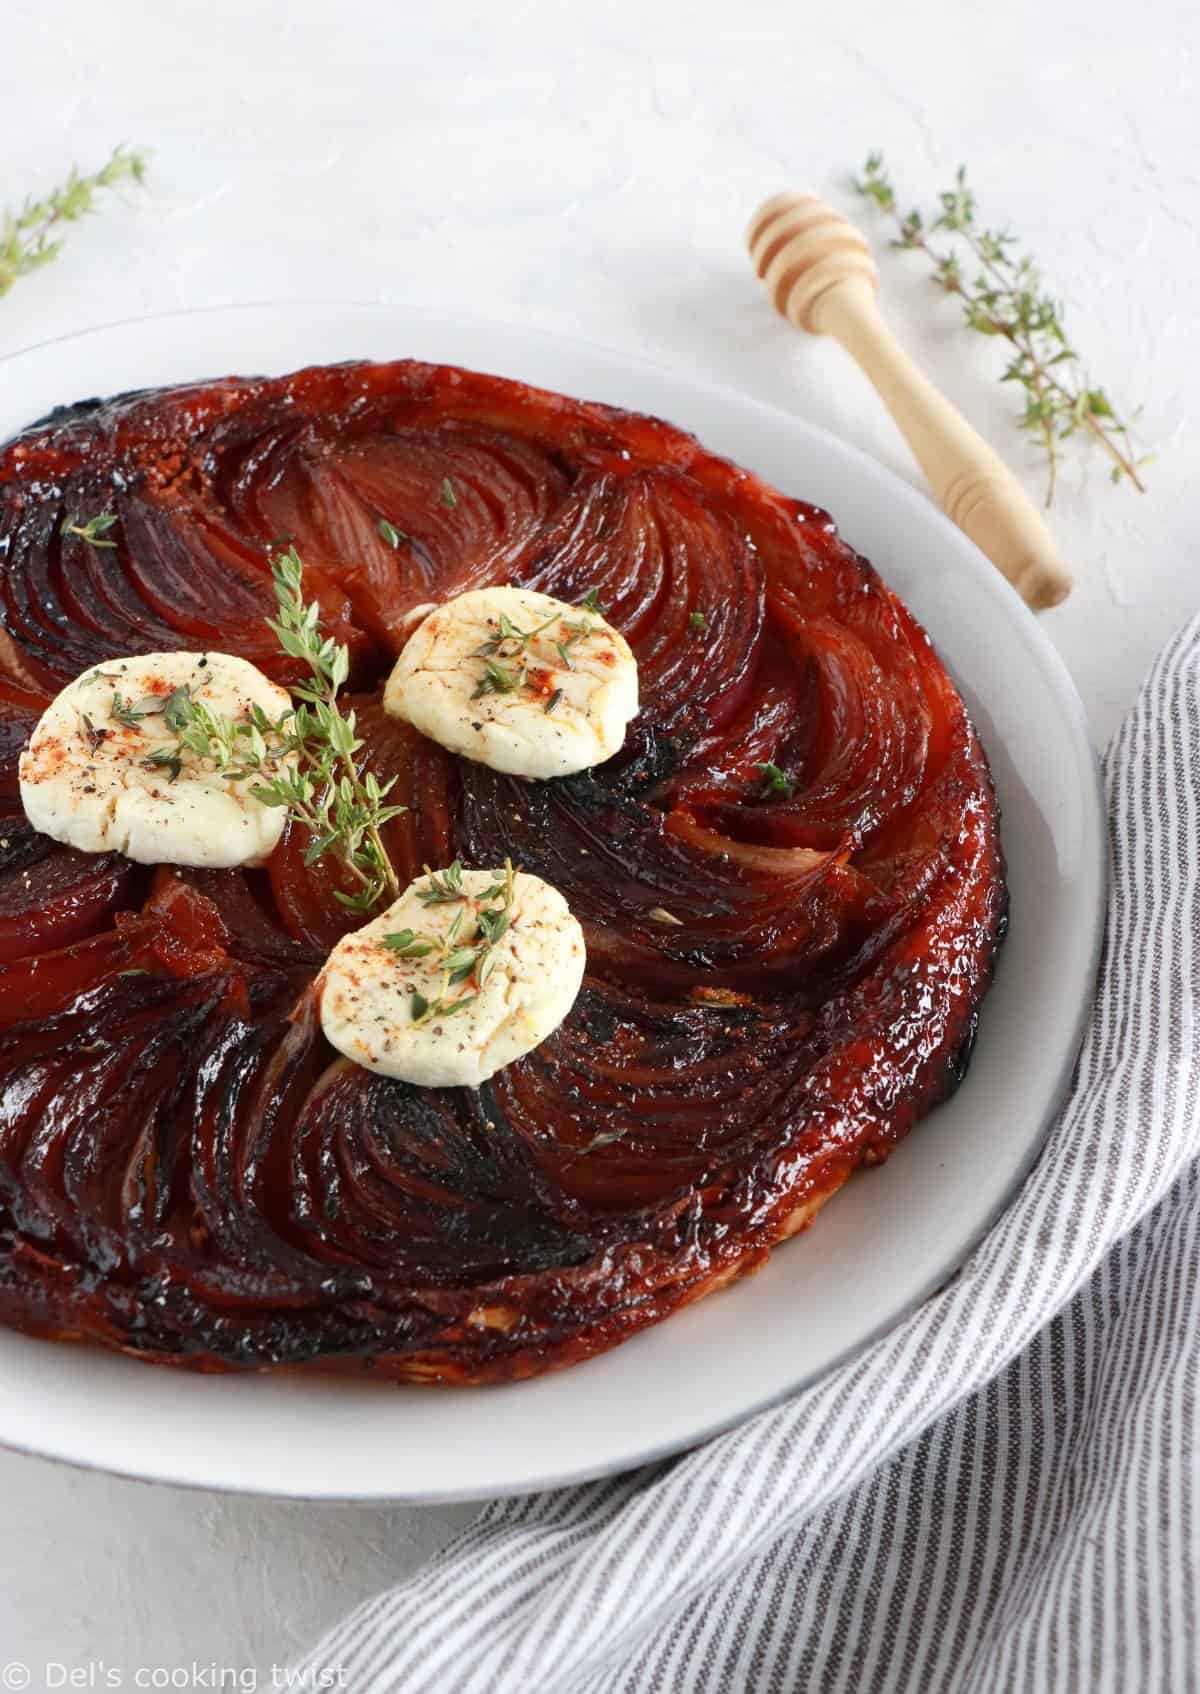 https://www.delscookingtwist.com/wp-content/uploads/2018/11/Goat-Cheese-and-Red-Onion-Tarte-Tatin_4.jpg